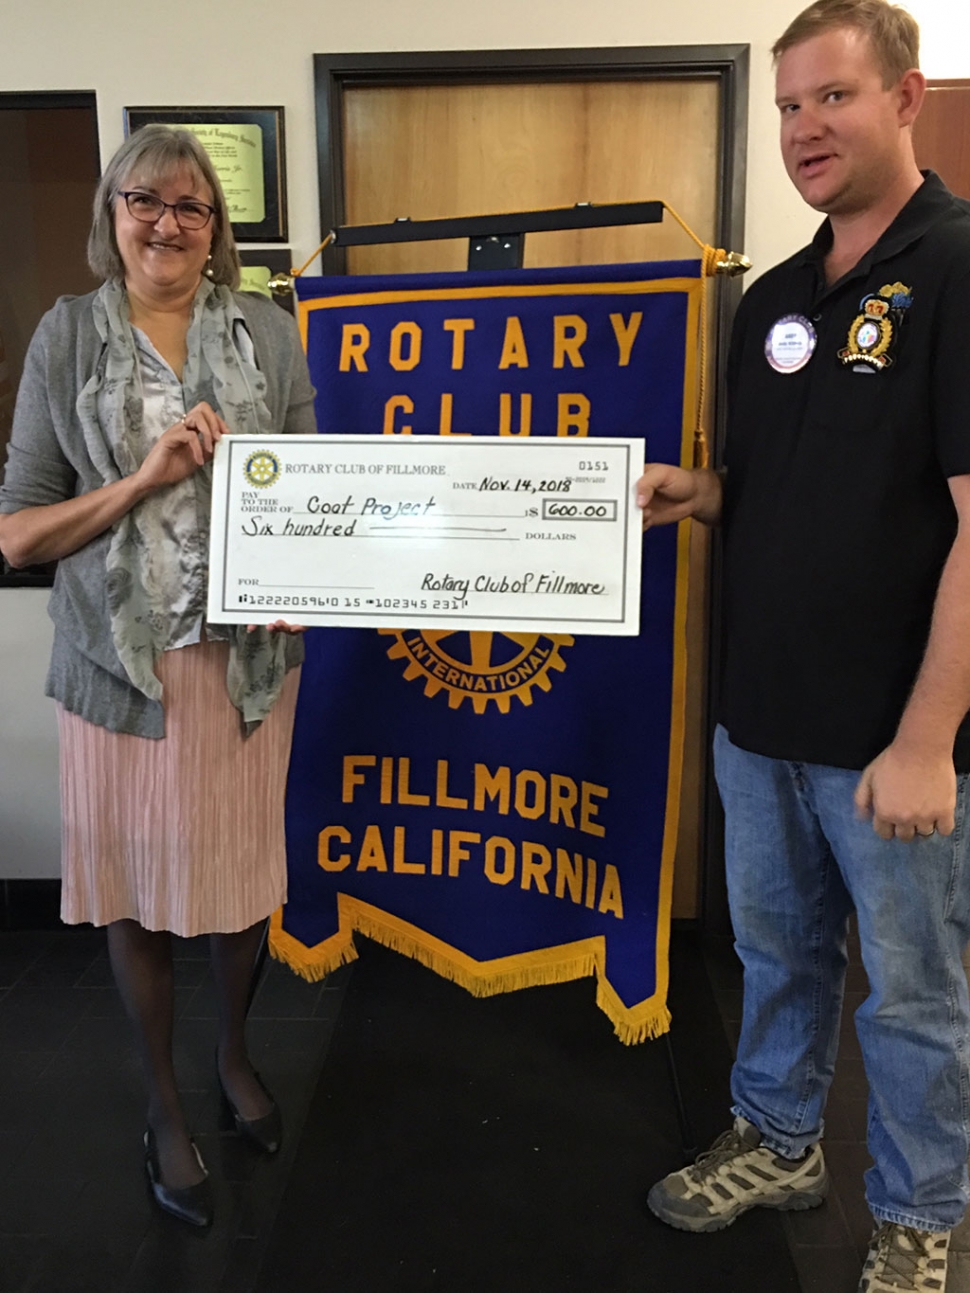 Laura Bartels received a check for $600 on behalf of Santa Clara Valley Legal Aid. Rotary President Andy Klittich presented the check which is used to buy warm winter coats for children in need. Bartels has been hosting the fundraiser for 10 years. Photo courtesy Martha Richardson & Ari Larson.